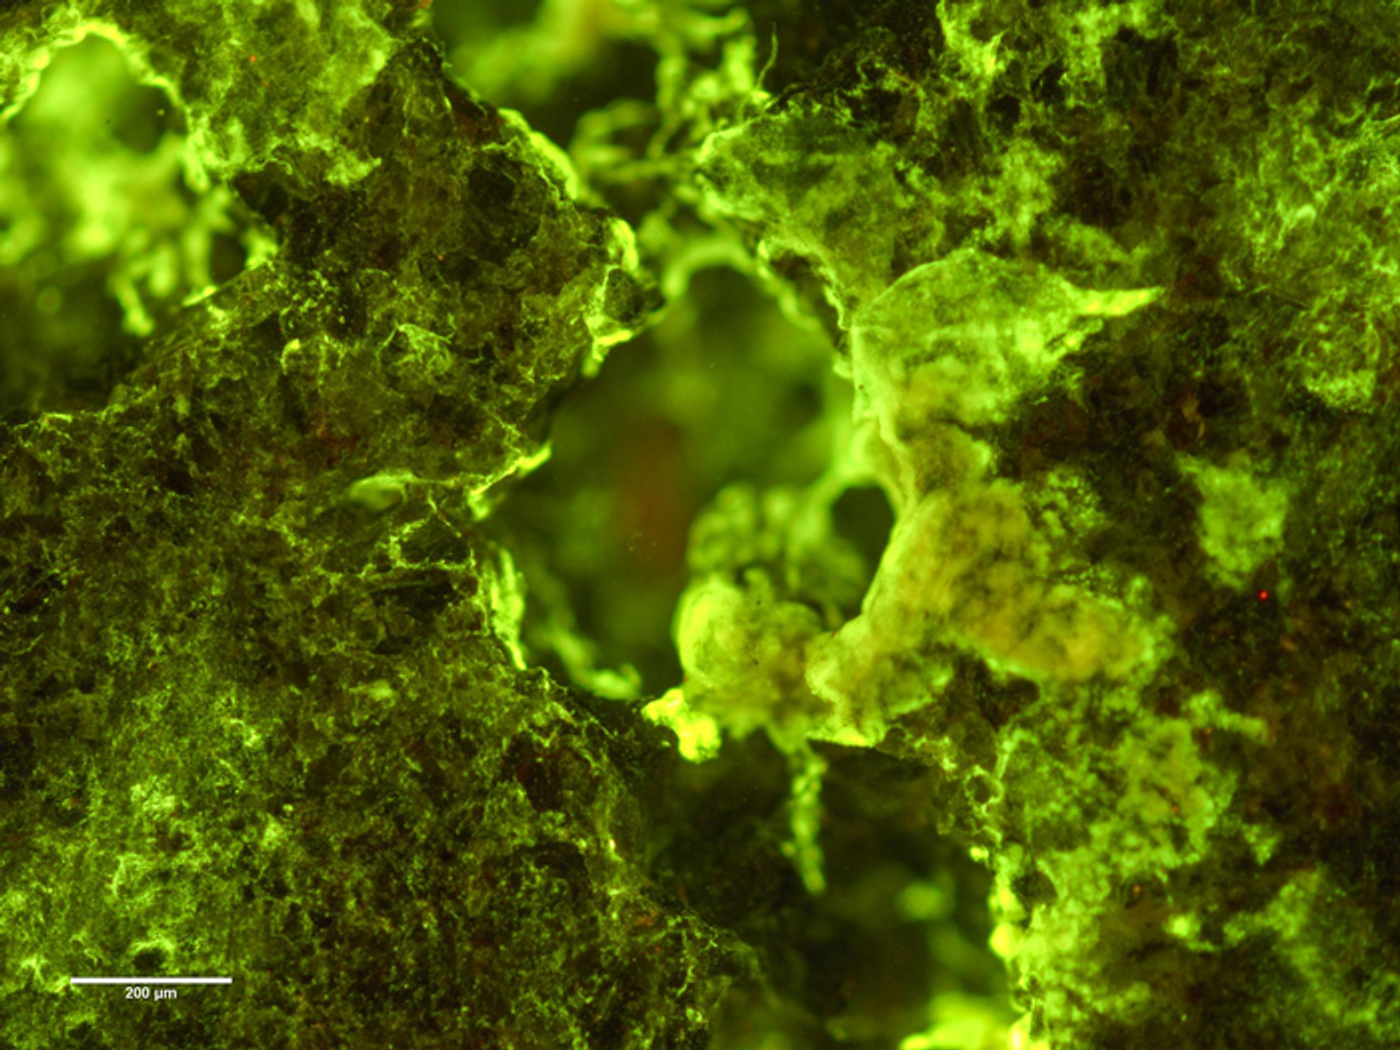 Preflight fluorescence microscopy image of biofilm of Spingomonas desiccabilis biofilm on the surface of a basalt slide. Growth can be seen into the rock cavities. / Credit: Image Courtesy of ESA